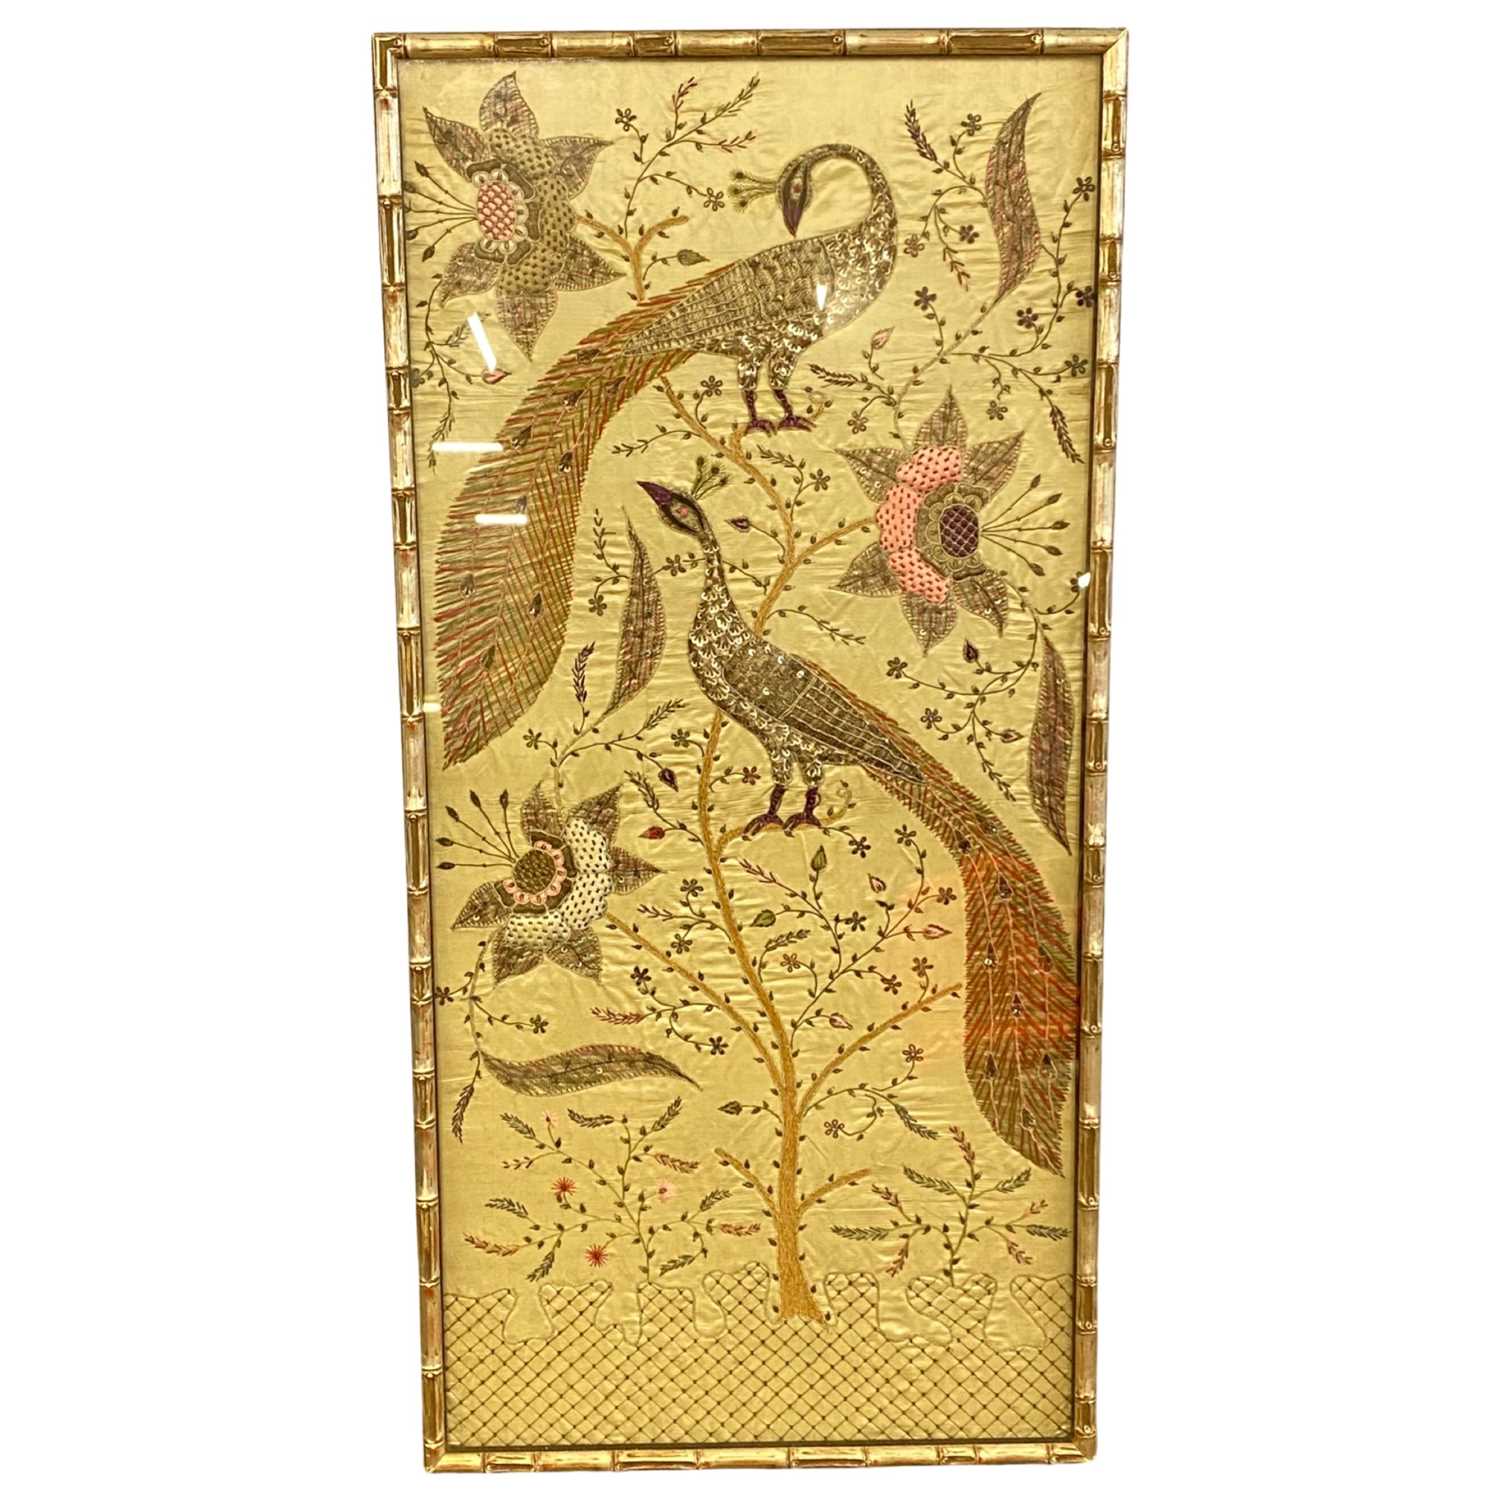 An Indian embroidered silk picture, on cream silk embroidered with peacocks, flowers and foliage, in - Image 2 of 2